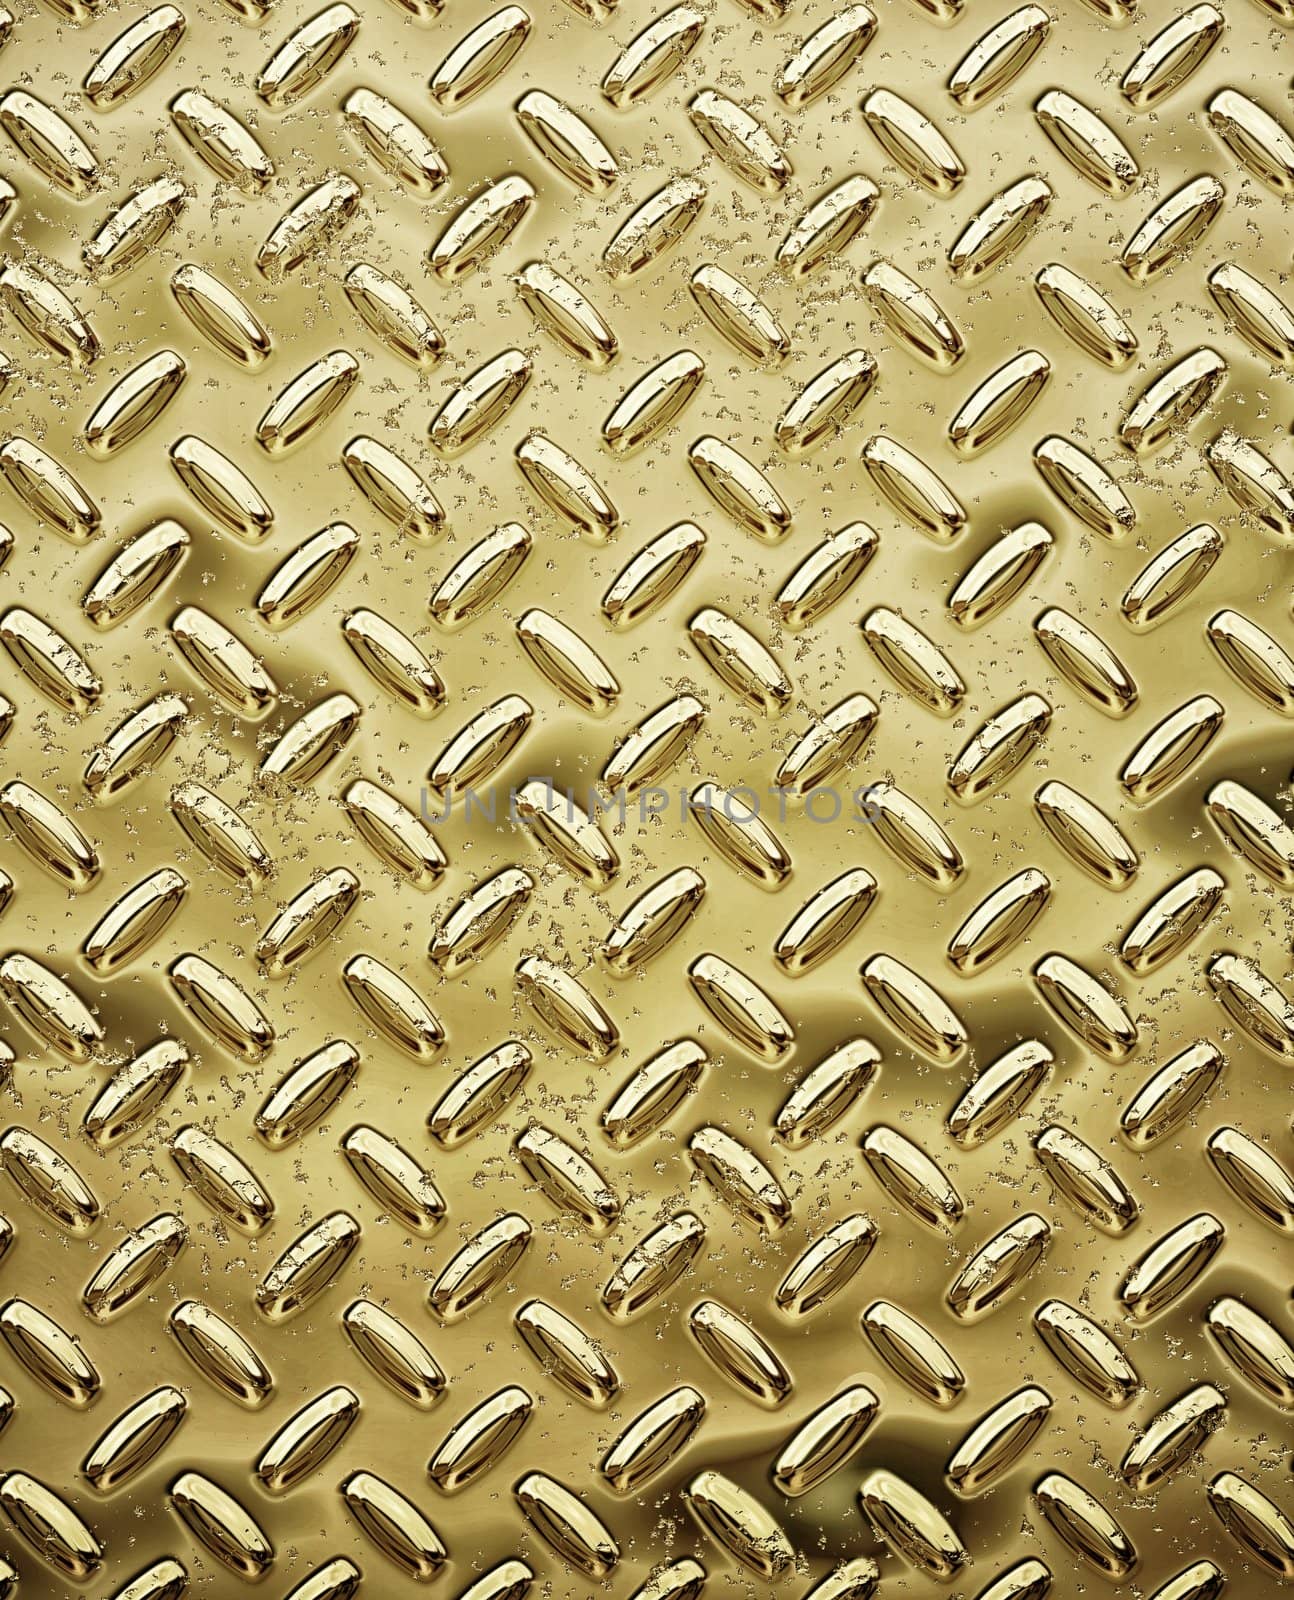 gold tread or diamond plate by clearviewstock